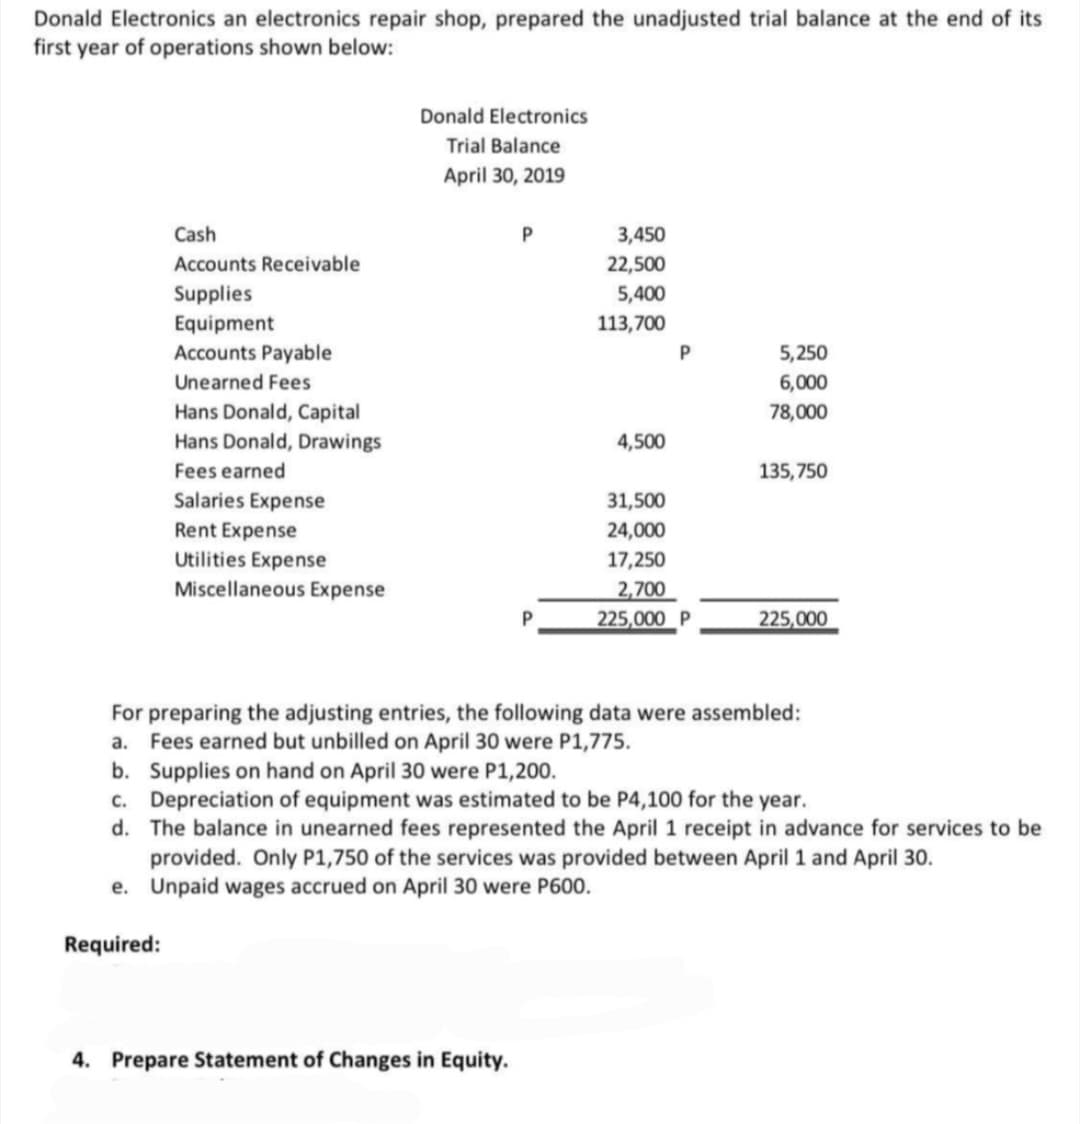 Donald Electronics an electronics repair shop, prepared the unadjusted trial balance at the end of its
first year of operations shown below:
Donald Electronics
Trial Balance
April 30, 2019
Cash
3,450
Accounts Receivable
22,500
Supplies
5,400
Equipment
Accounts Payable
113,700
5,250
Unearned Fees
6,000
Hans Donald, Capital
Hans Donald, Drawings
78,000
4,500
Fees earned
135,750
Salaries Expense
Rent Expense
31,500
24,000
Utilities Expense
Miscellaneous Expense
17,250
2,700
225,000 P
225,000
For preparing the adjusting entries, the following data were assembled:
a. Fees earned but unbilled on April 30 were P1,775.
b. Supplies on hand on April 30 were P1,200.
c. Depreciation of equipment was estimated to be P4,100 for the year.
d. The balance in unearned fees represented the April 1 receipt in advance for services to be
provided. Only P1,750 of the services was provided between April 1 and April 30.
e. Unpaid wages accrued on April 30 were P600.
Required:
4. Prepare Statement of Changes in Equity.
